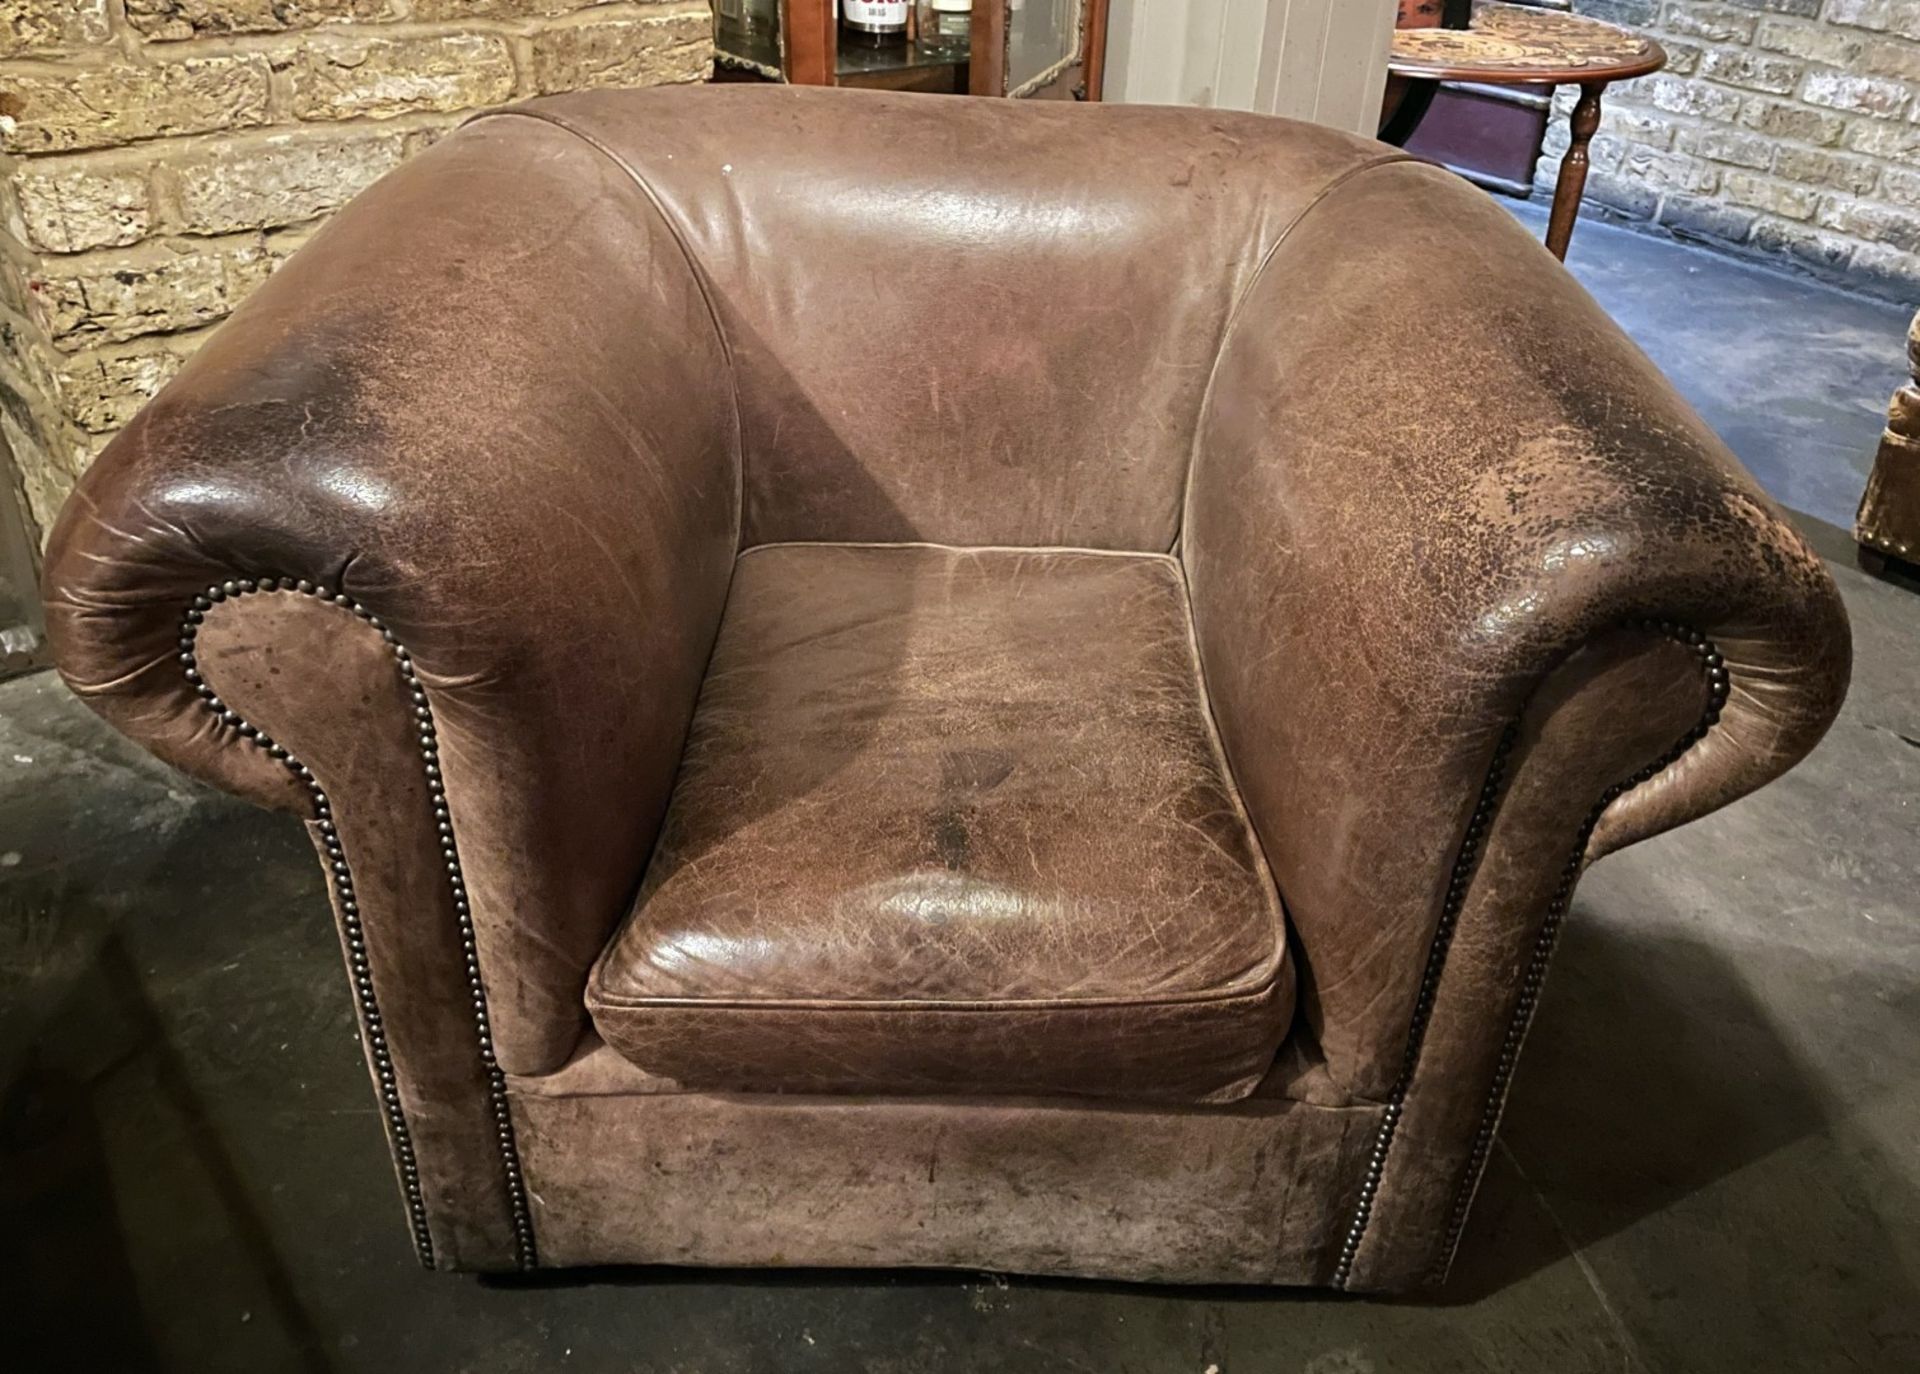 1 x Vintage Large Brown Sheepskin Leather Armchair with a Distressed Aesthetic and Studded Detailing - Image 2 of 8